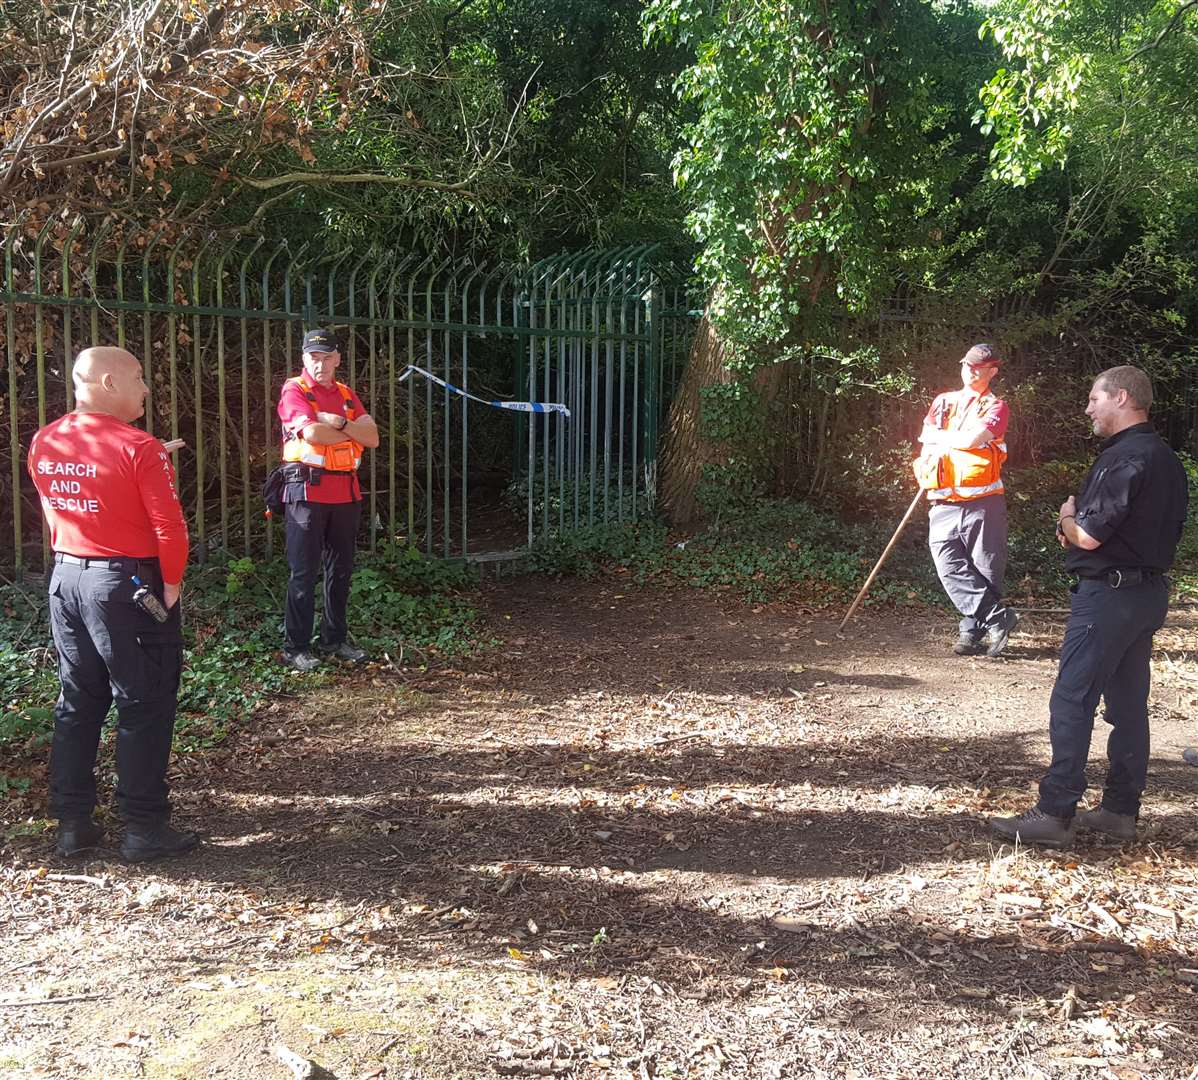 Search and rescue teams at an unofficial entrance to Old Park in Canterbury